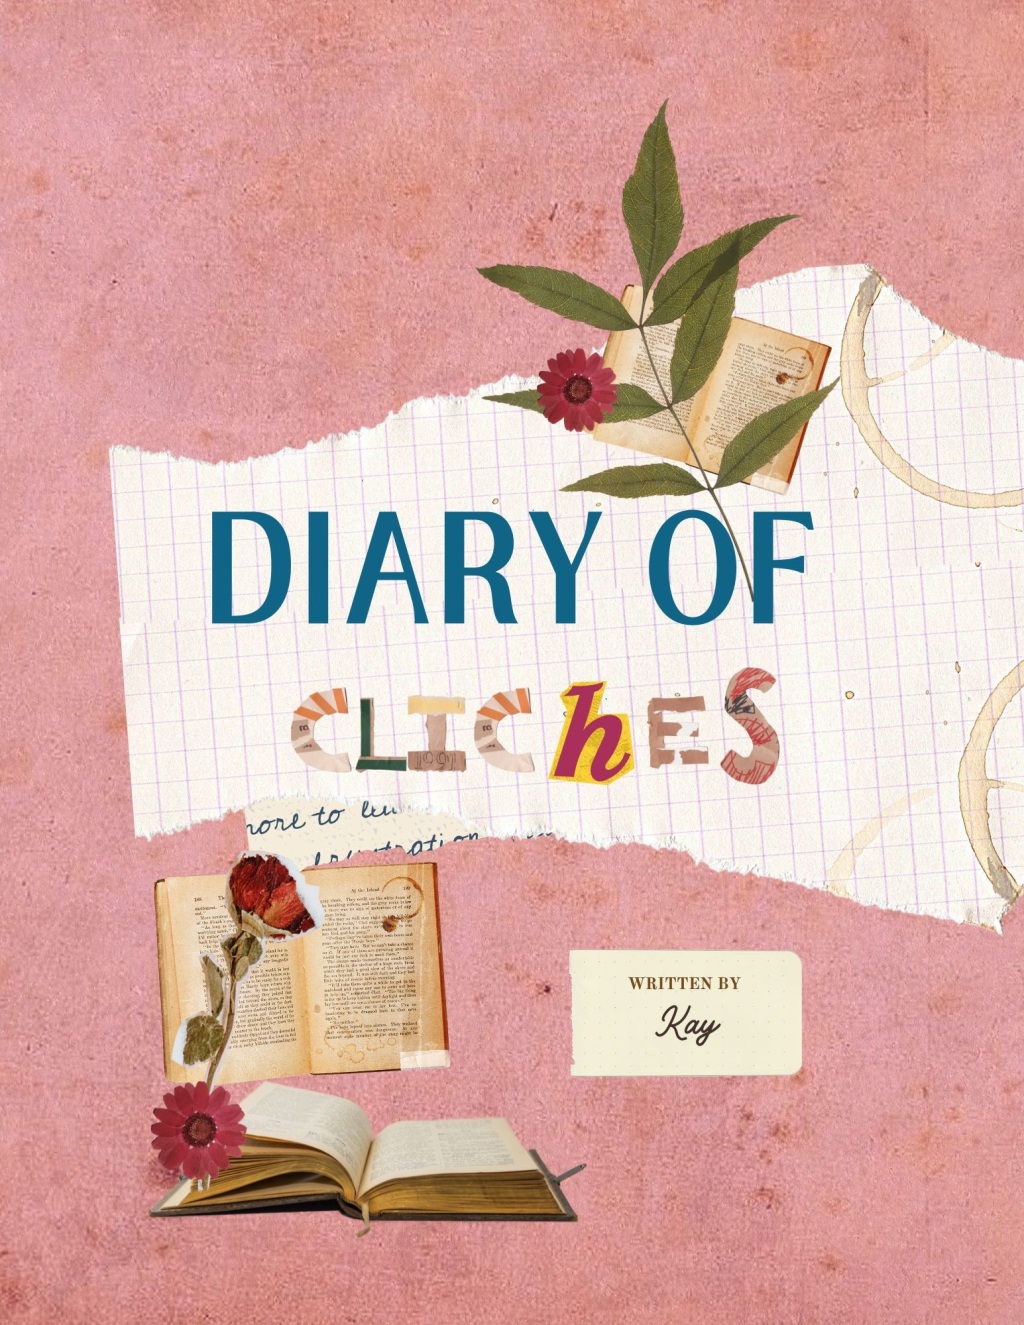 Behind The Pages: How My Personal Journey Inspired ‘Diary of Cliches’